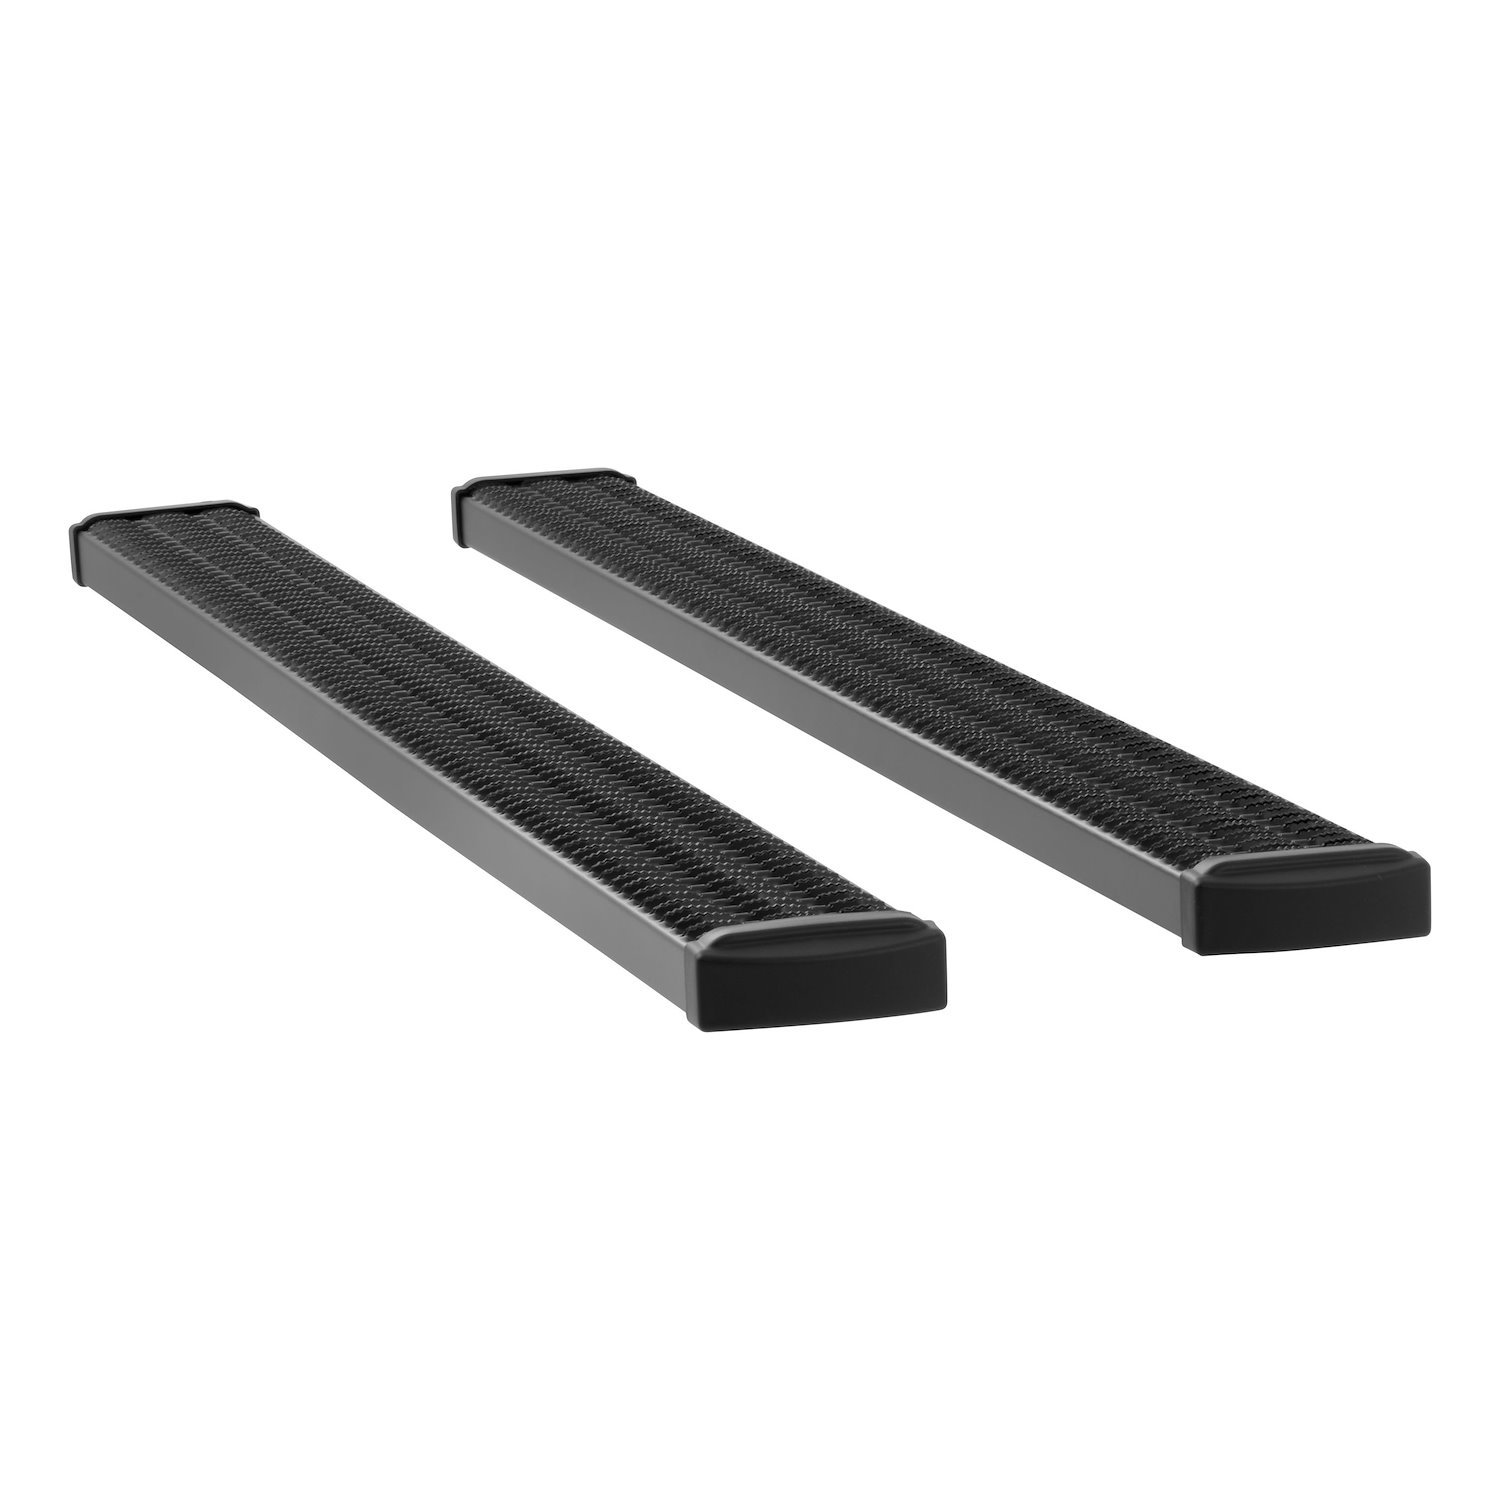 415088-401232 Grip Step 7 in. x 88 in. Black Aluminum Running Boards Fits Select Dodge, Ram Crew